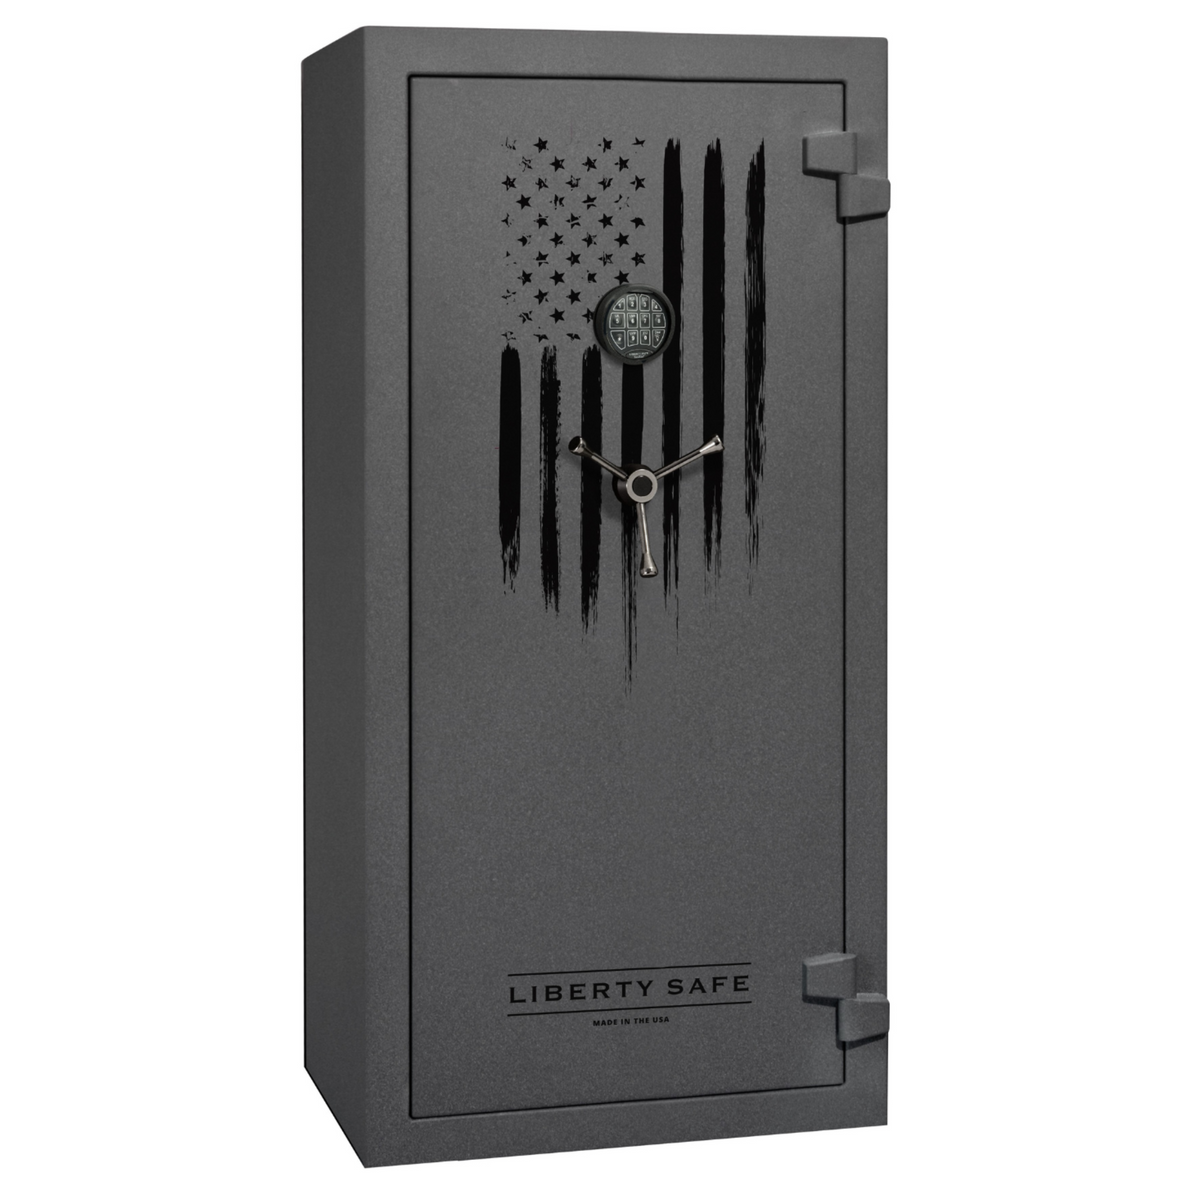 Centurion 24 | Limited Edition | Granite Flag | Level 1 Security | 40 Minute Fire Protection | $100 Factory Mail In Rebate